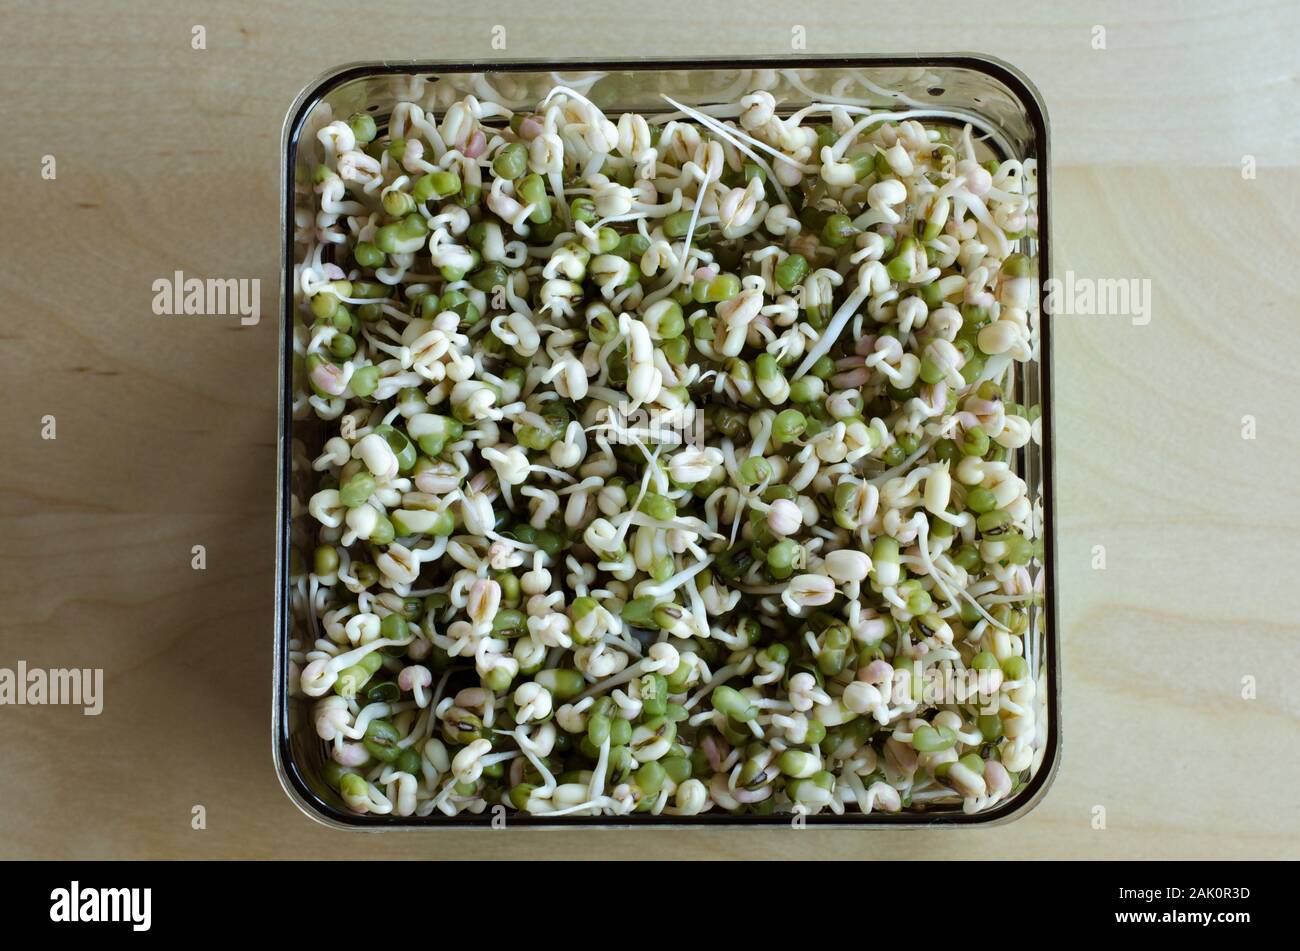 Making of mungbean sprouts on a tray on a wooden table. Focused background. Day 3 Stock Photo